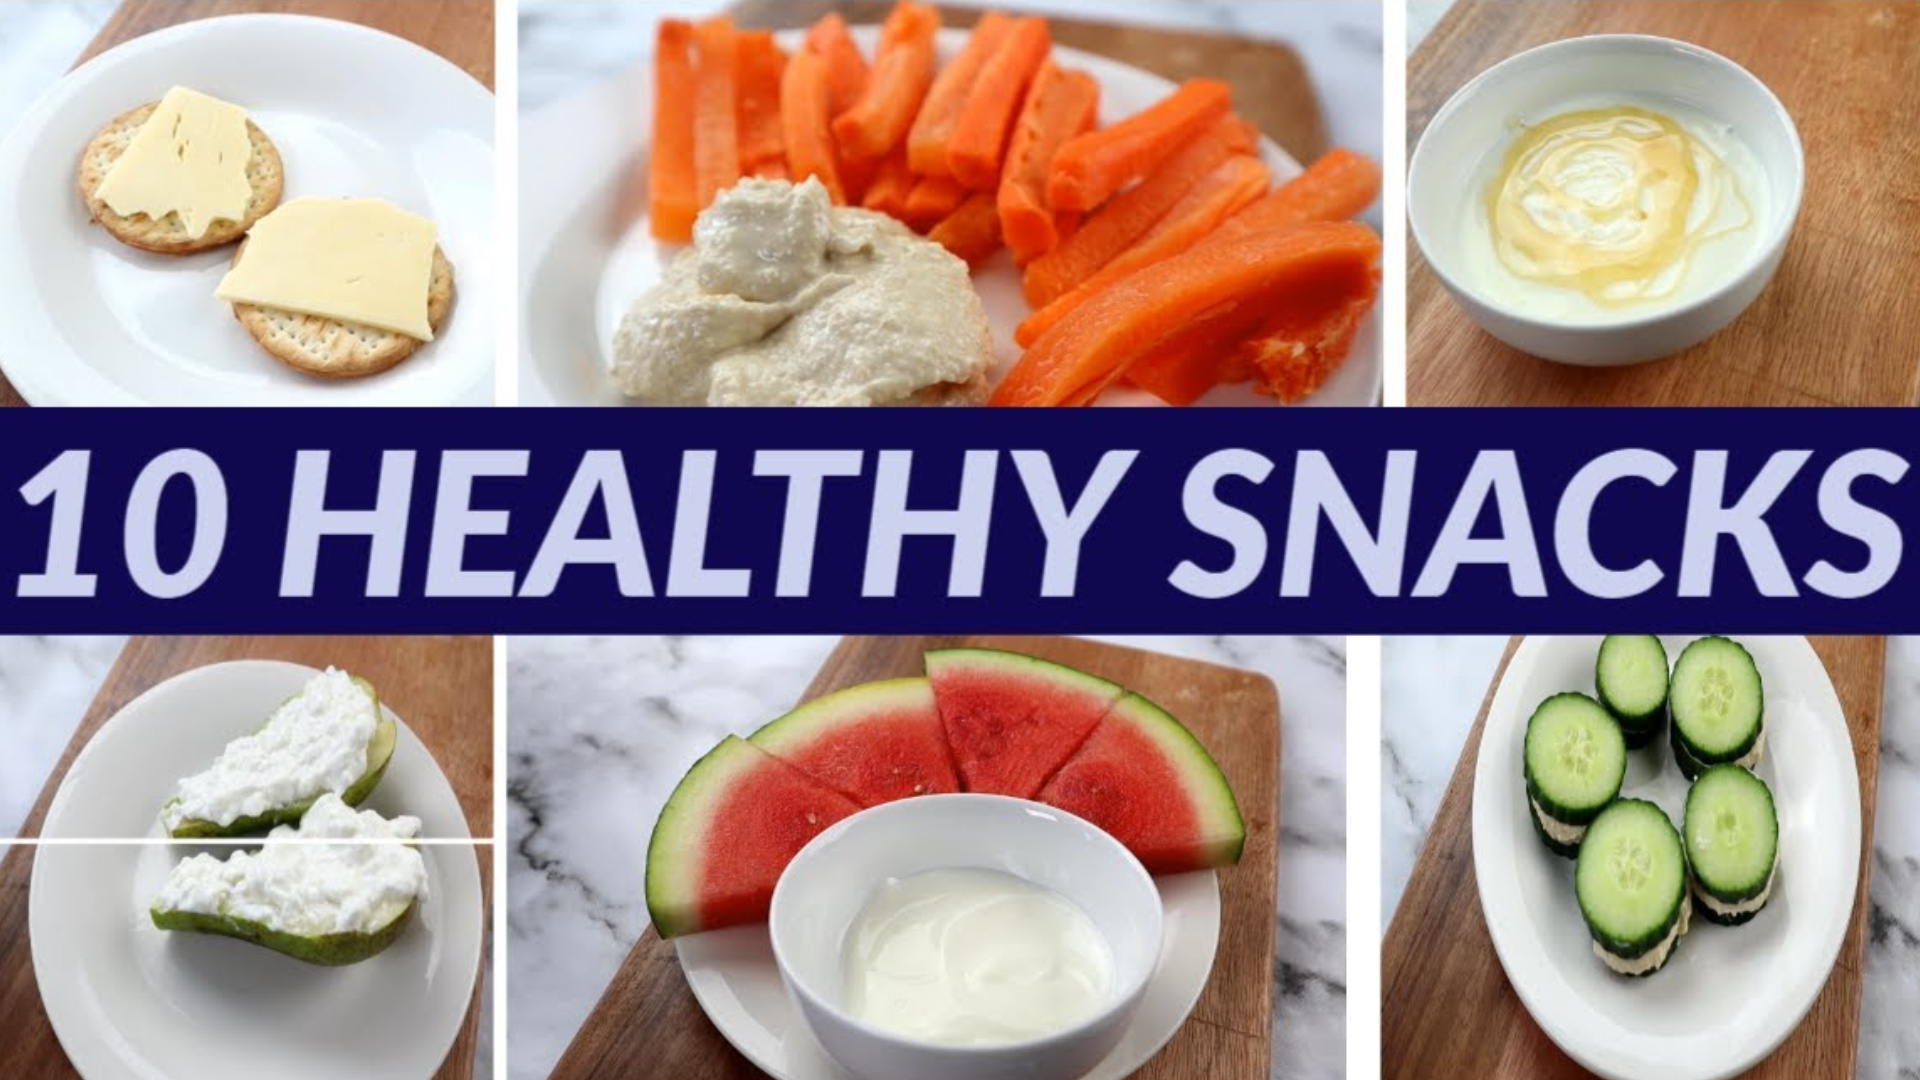 Top 10 Best Healthy Snacks for Weight Loss image